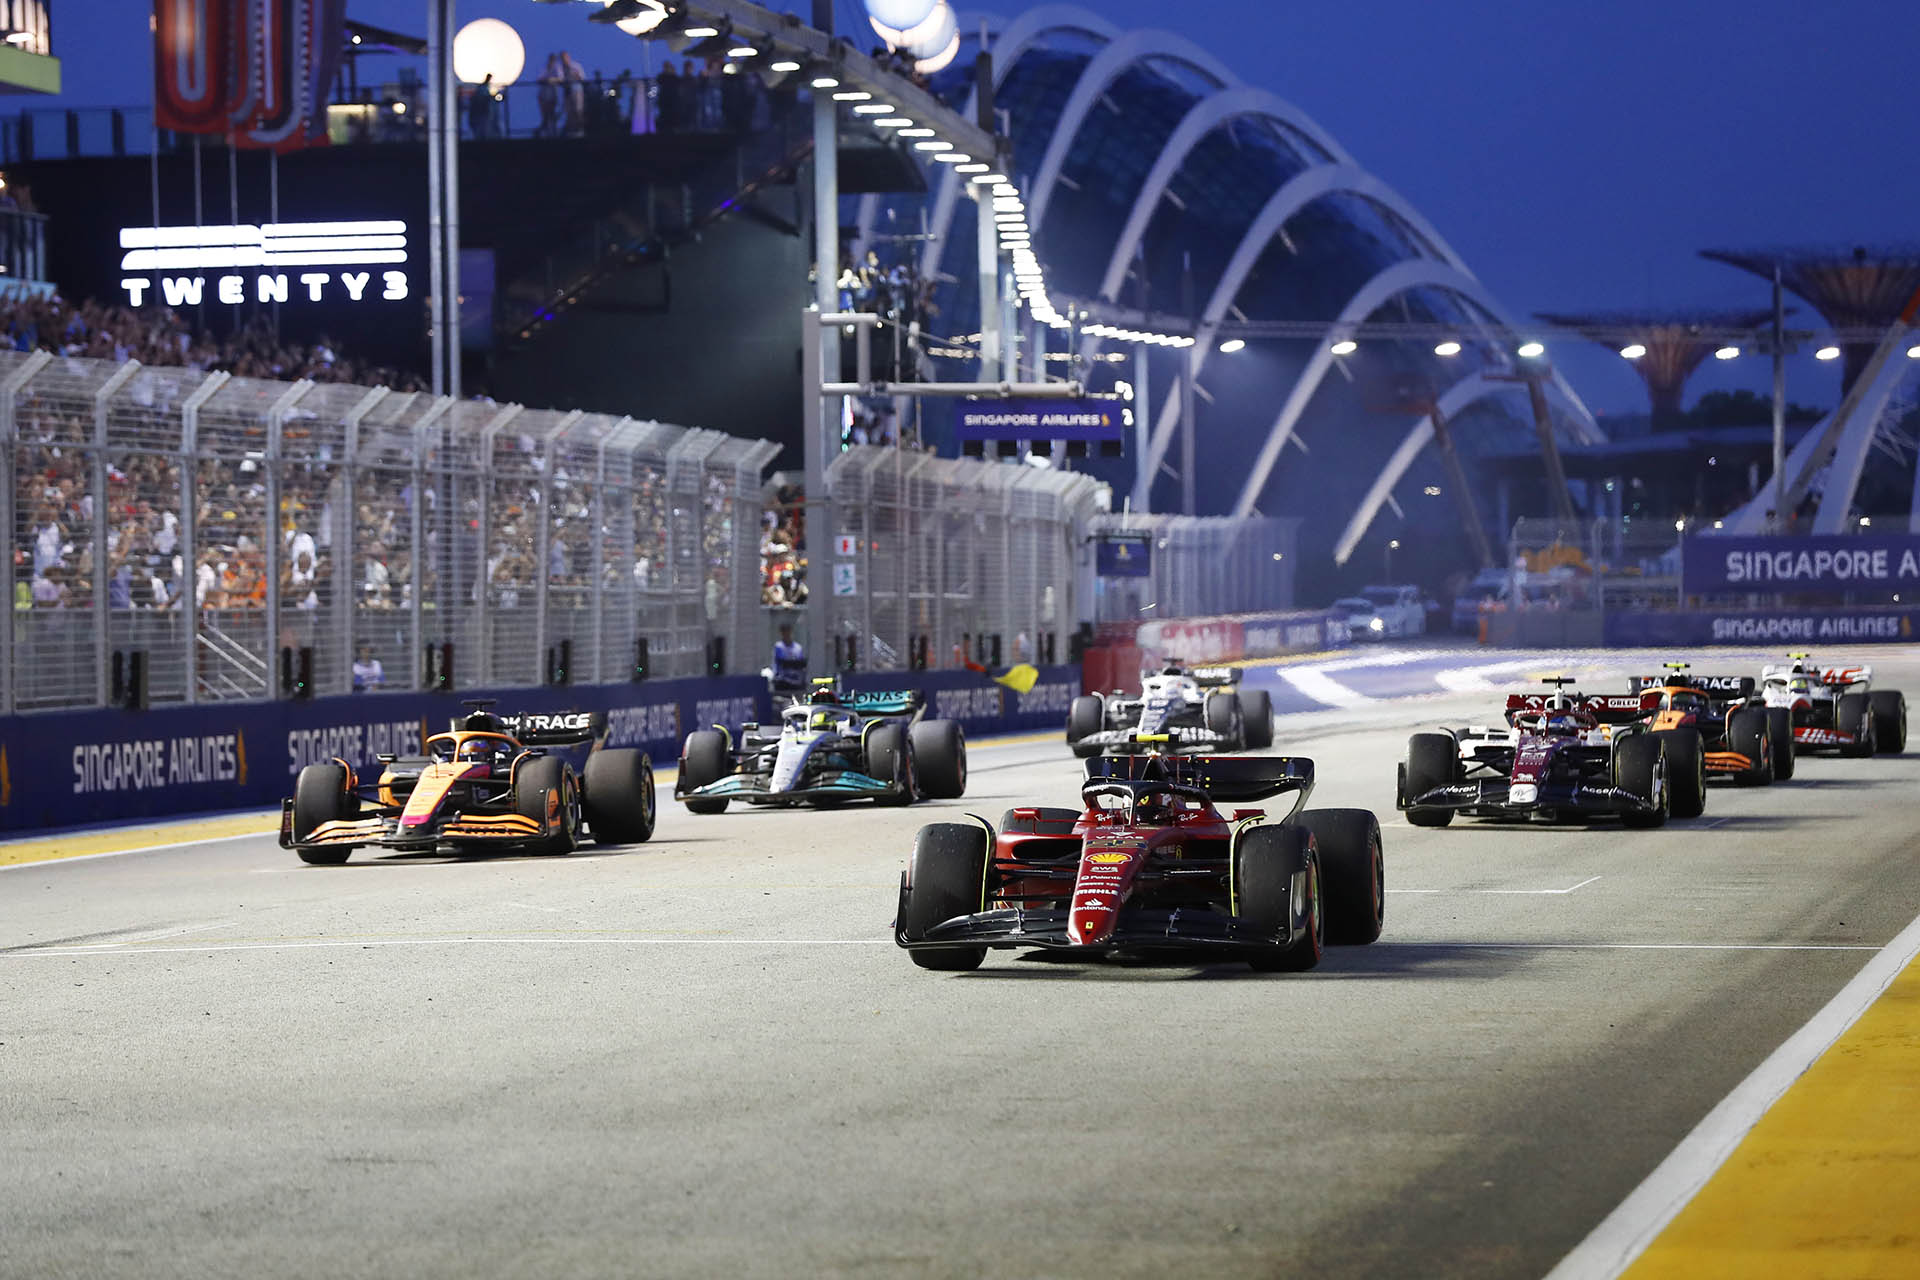 Free F1 Screenings, Behind-The-Scenes Tours and More Race-Themed Activities To Check Out — Get Your Heart Racing Before The Singapore Grand Prix In September